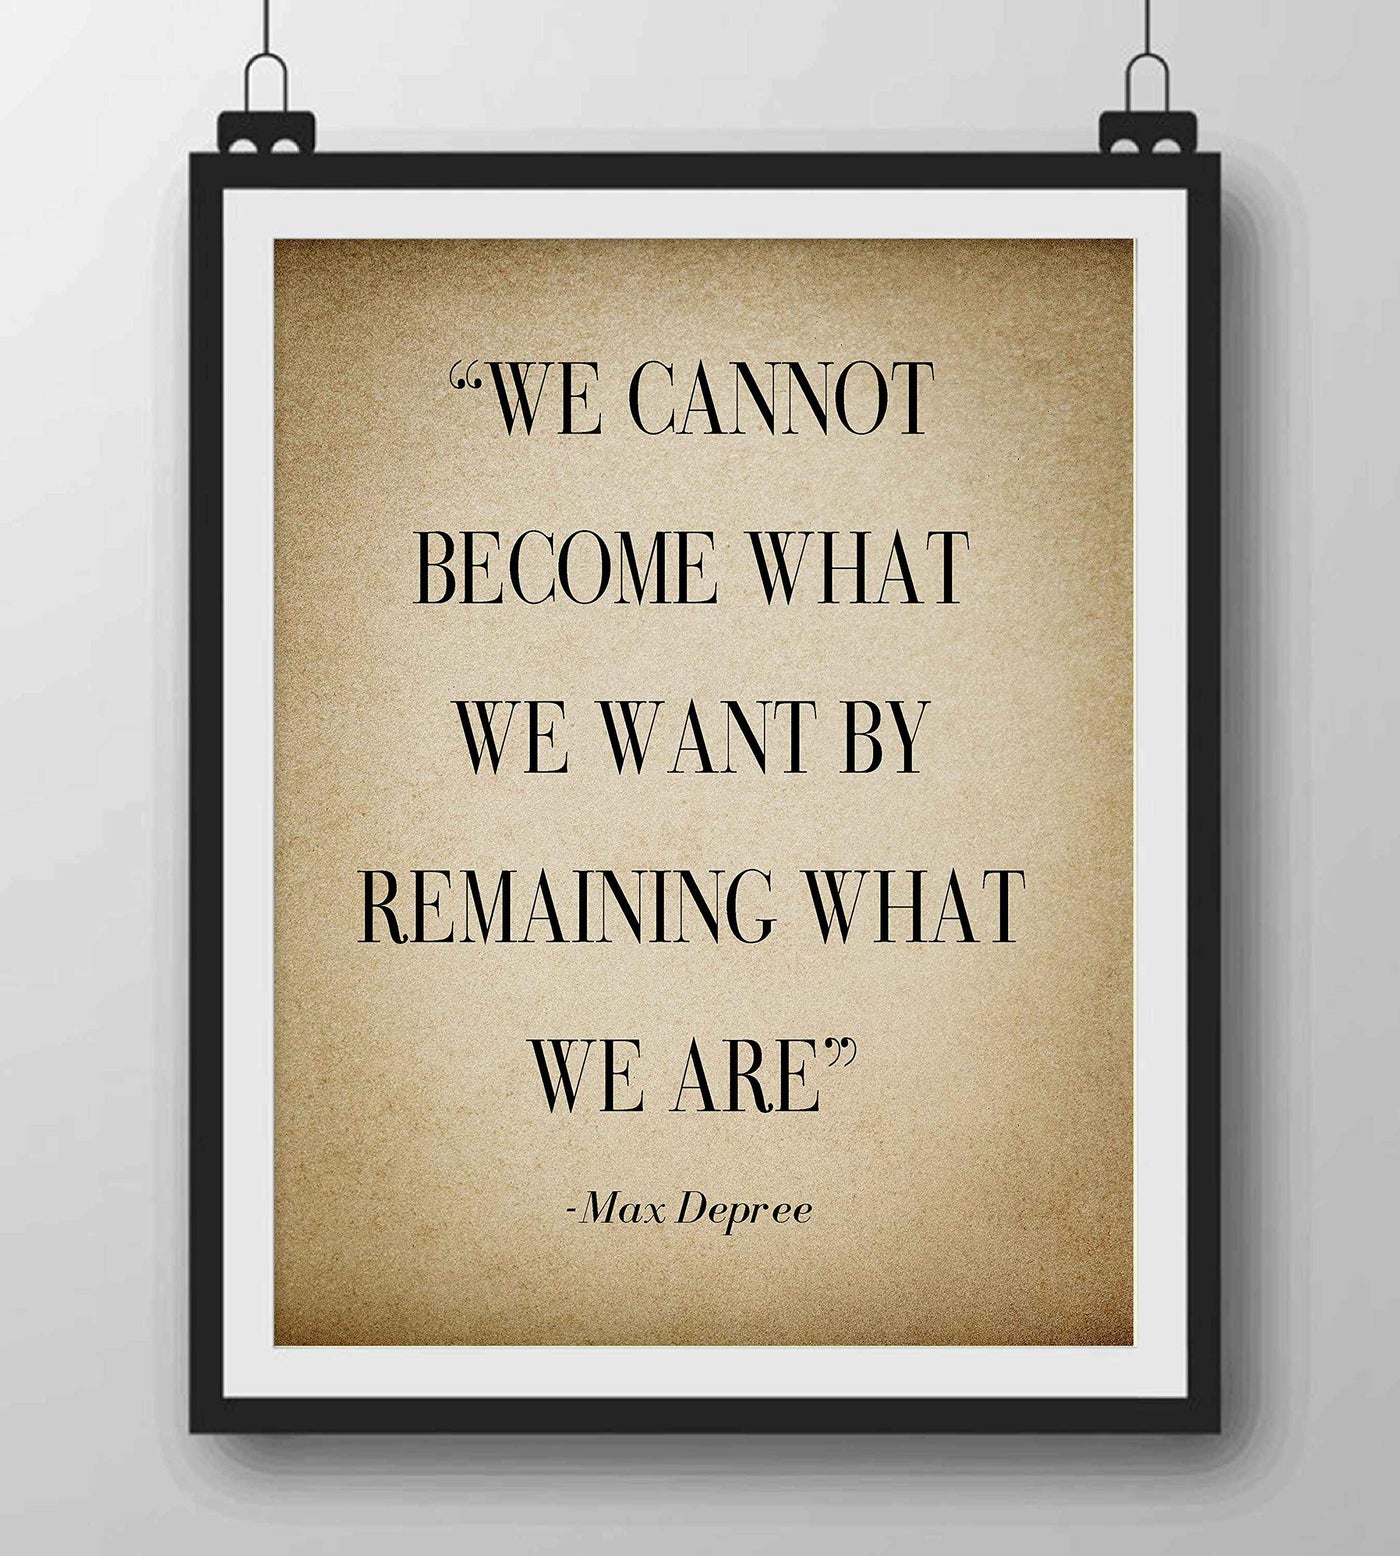 Max Depree-"Cannot Become What We Want By Remaining"-Positive Quotes Wall Art-8 x 10" Distressed Motivational Print-Ready to Frame. Inspirational Home-Office-School Decor. Perfect Sign for Motivation!